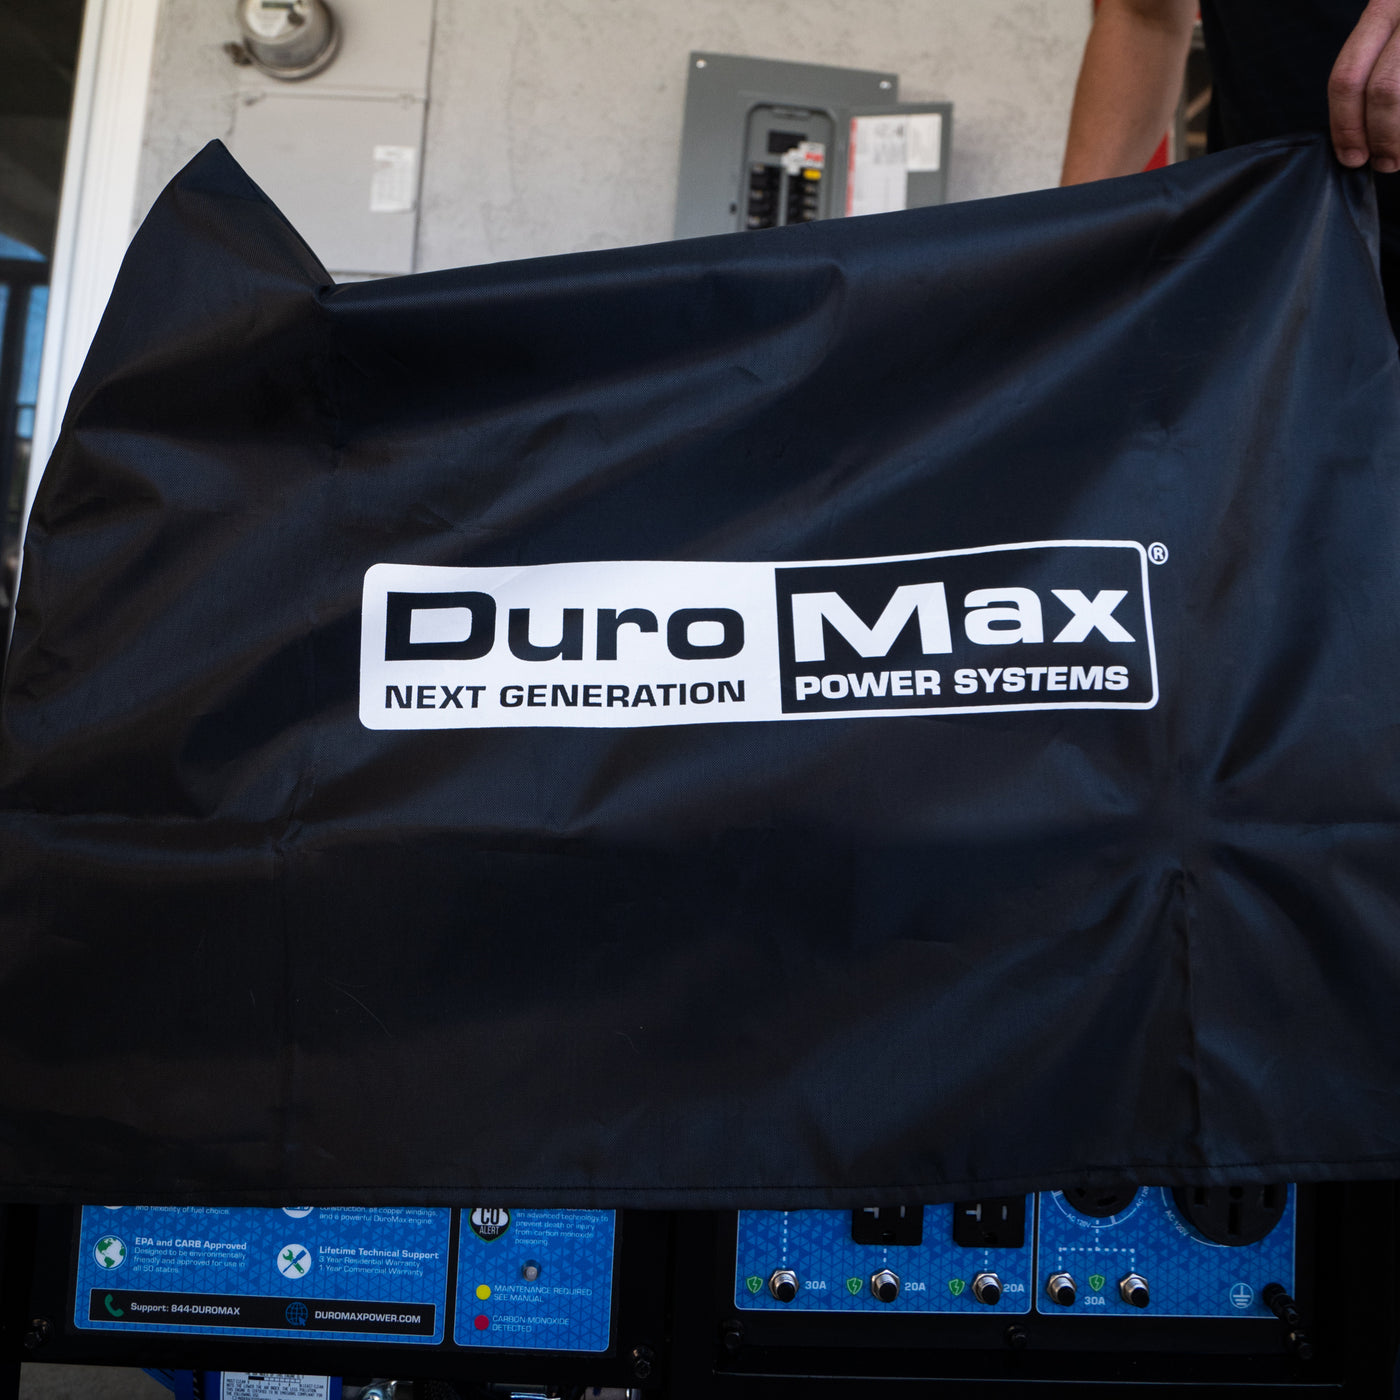 DuroMax  Small Weather Resistant Portable Generator Dust Guard Cover